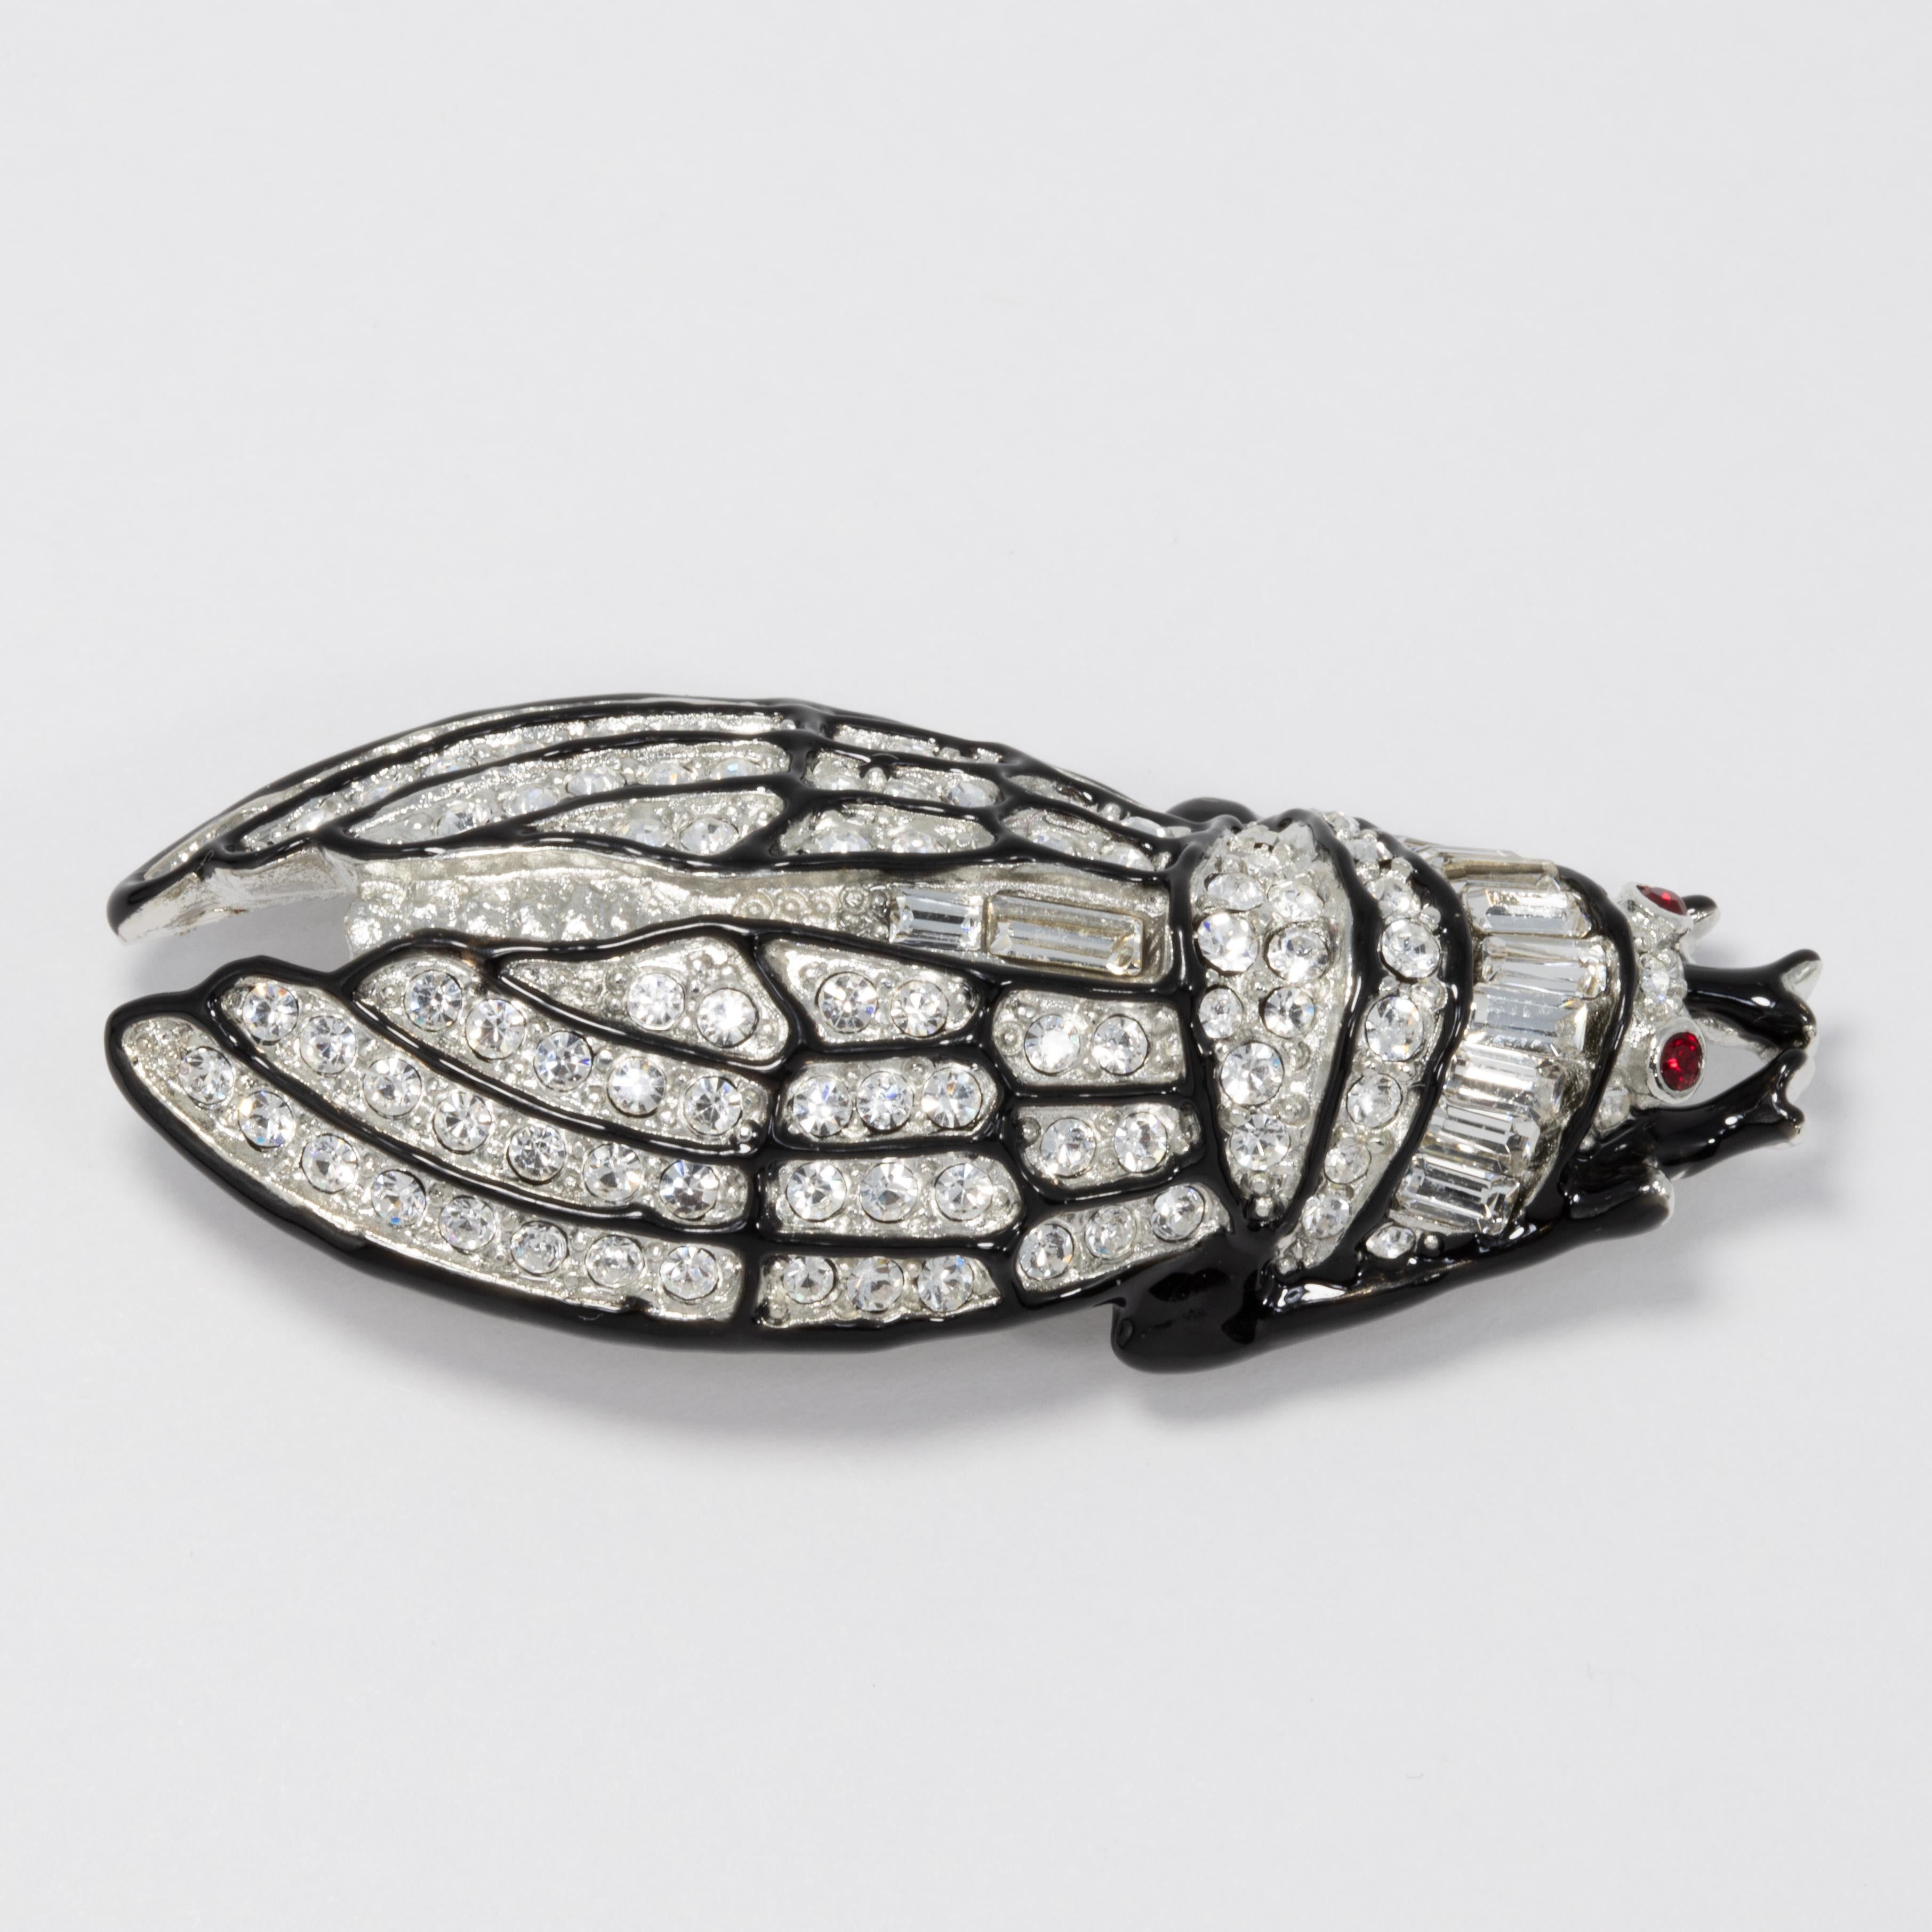 Pavé crystals illuminate this elegant cicada brooch that finishes your glamorous look.

Silver and crystal pavé
Black enamel highlights 
3 1/4